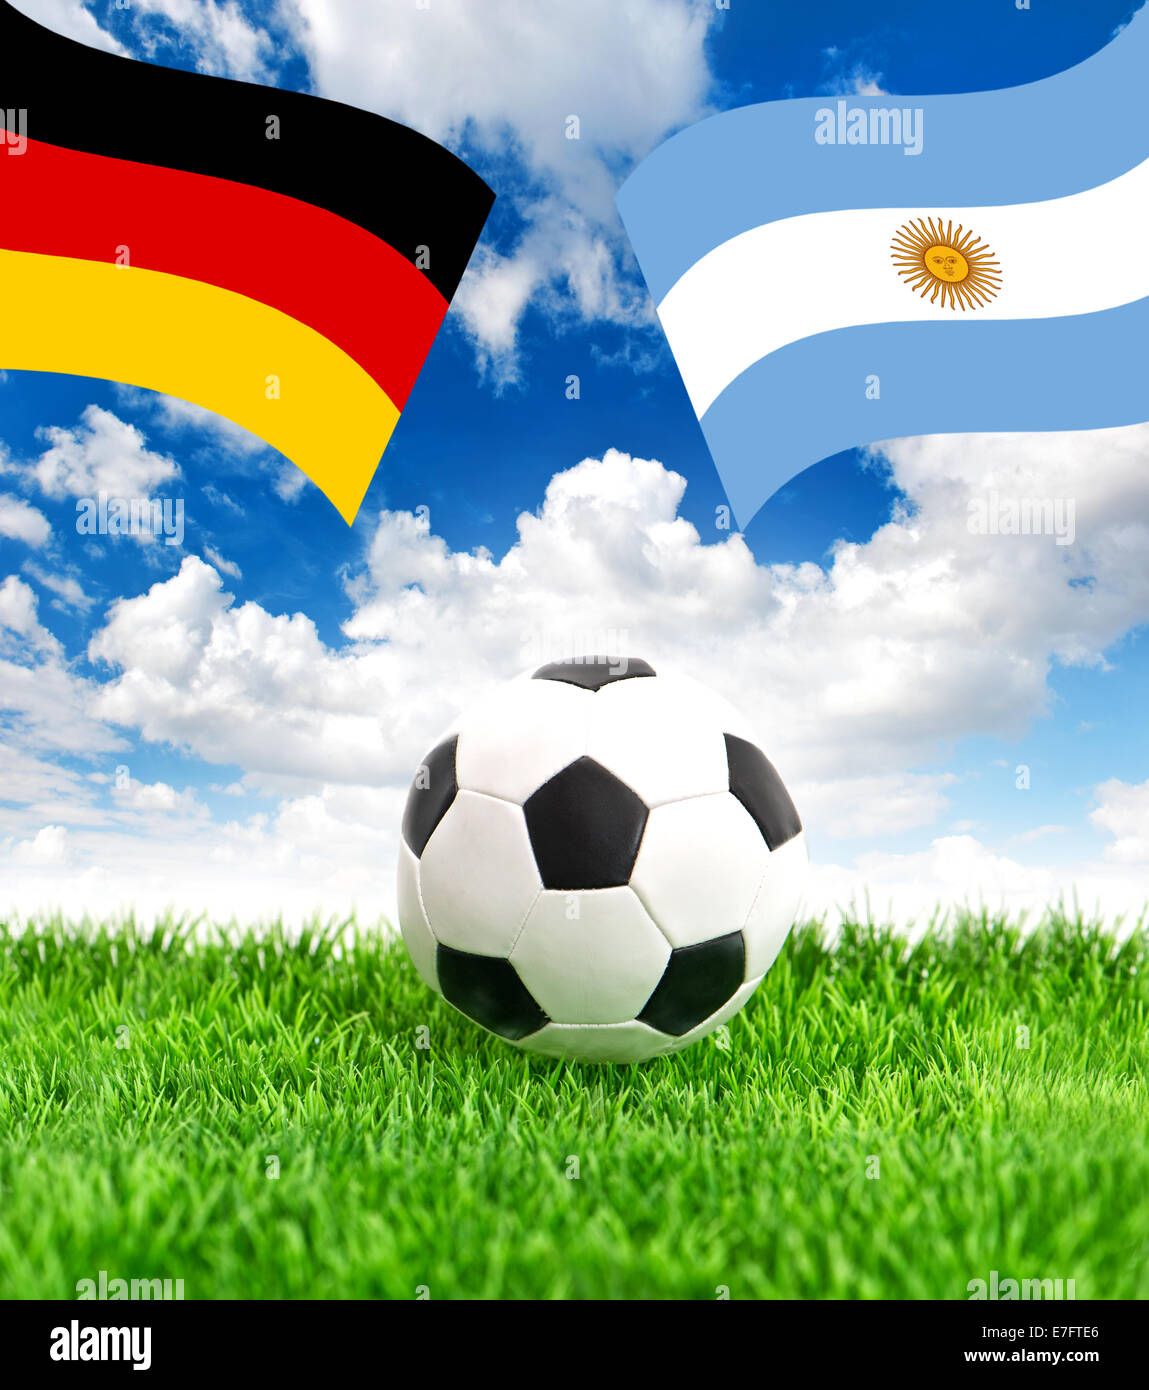 Soccer ball on green grass and national flags of Germany and Argentina over dramatic blue sky. Collage Stock Photo